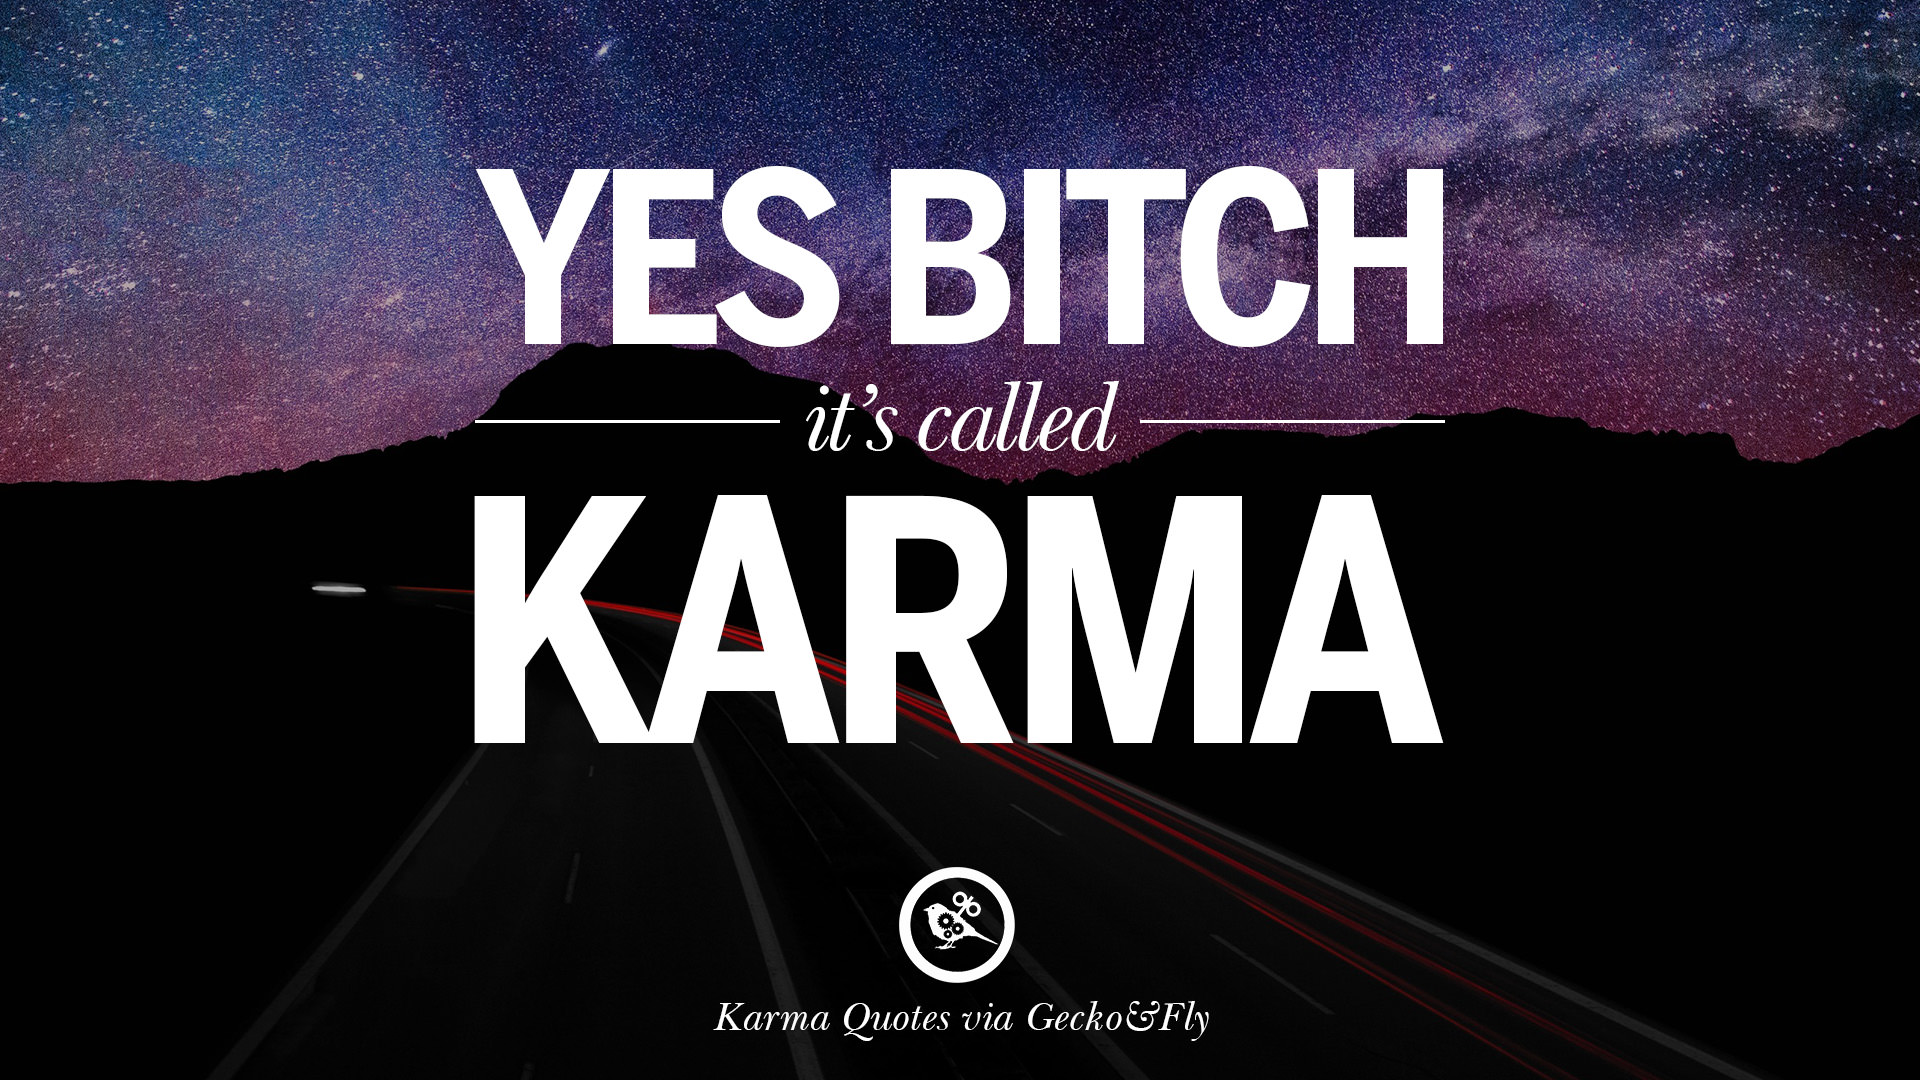 18 Good Karma Quotes On Relationship Revenge And Life